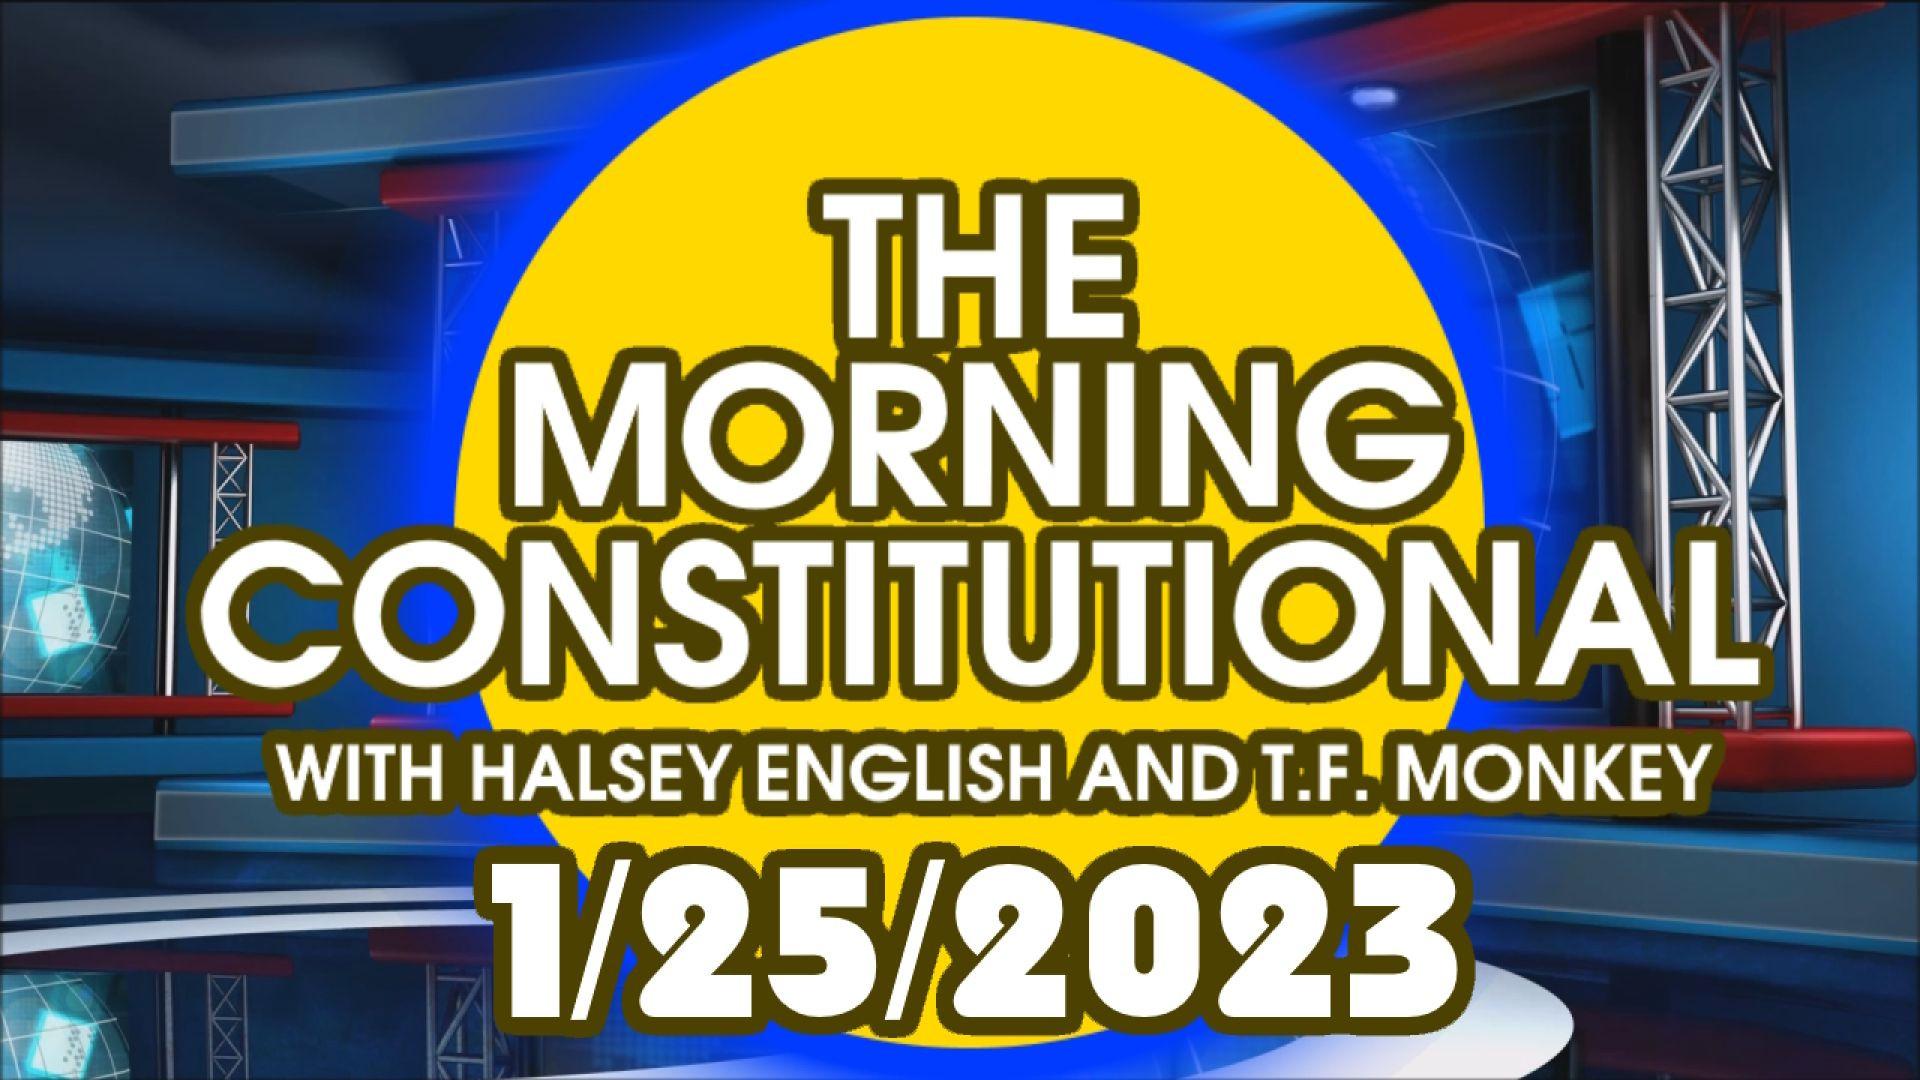 The Morning Constitutional: 1/25/2023